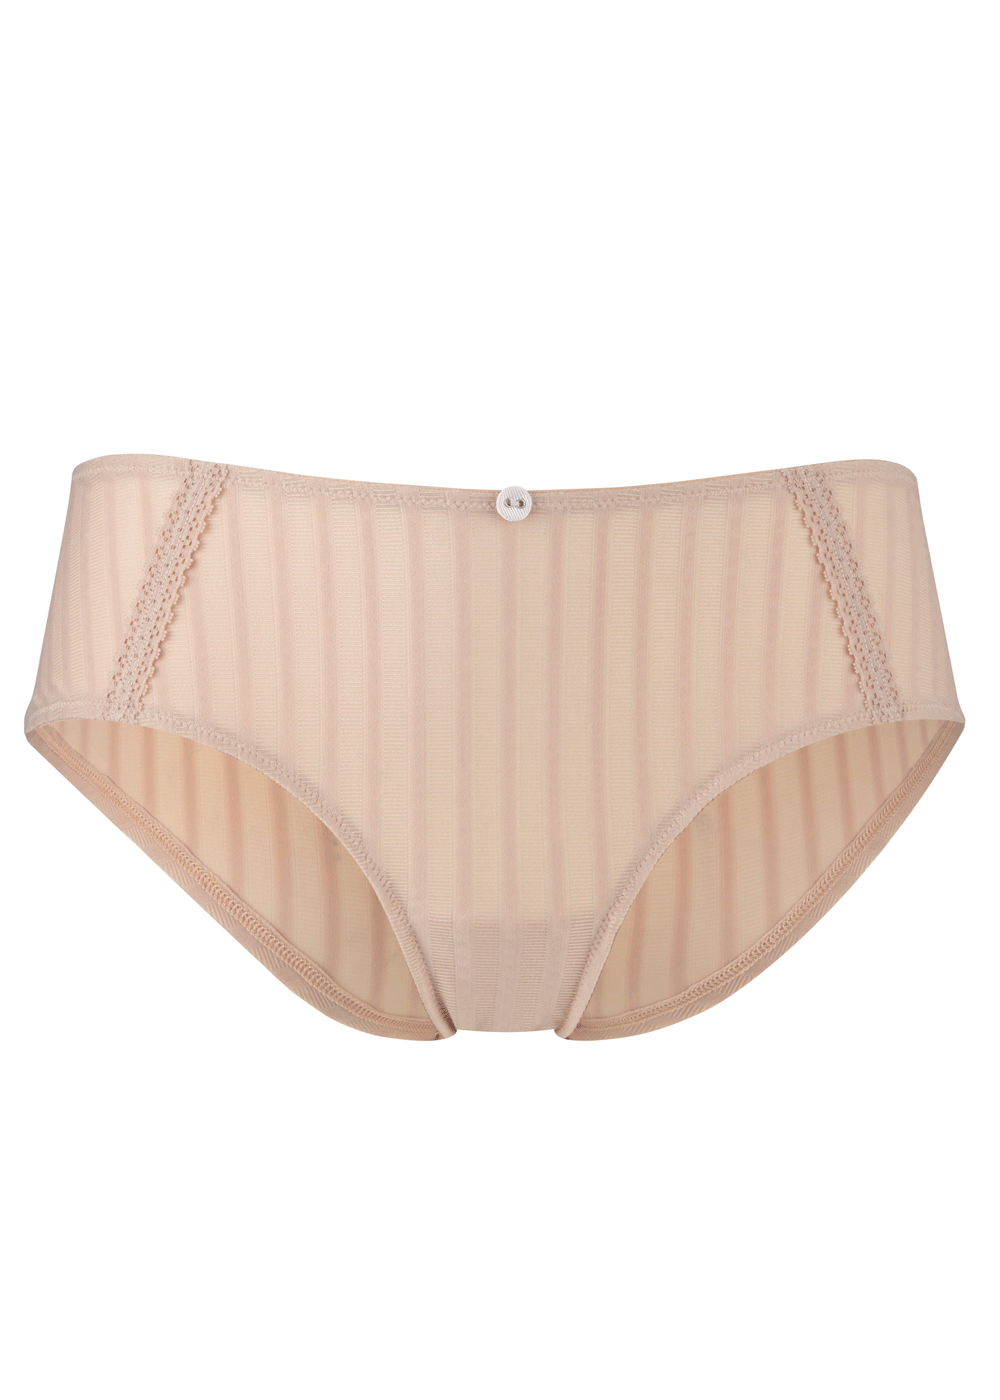 Shorty Cleo by Panache Nude